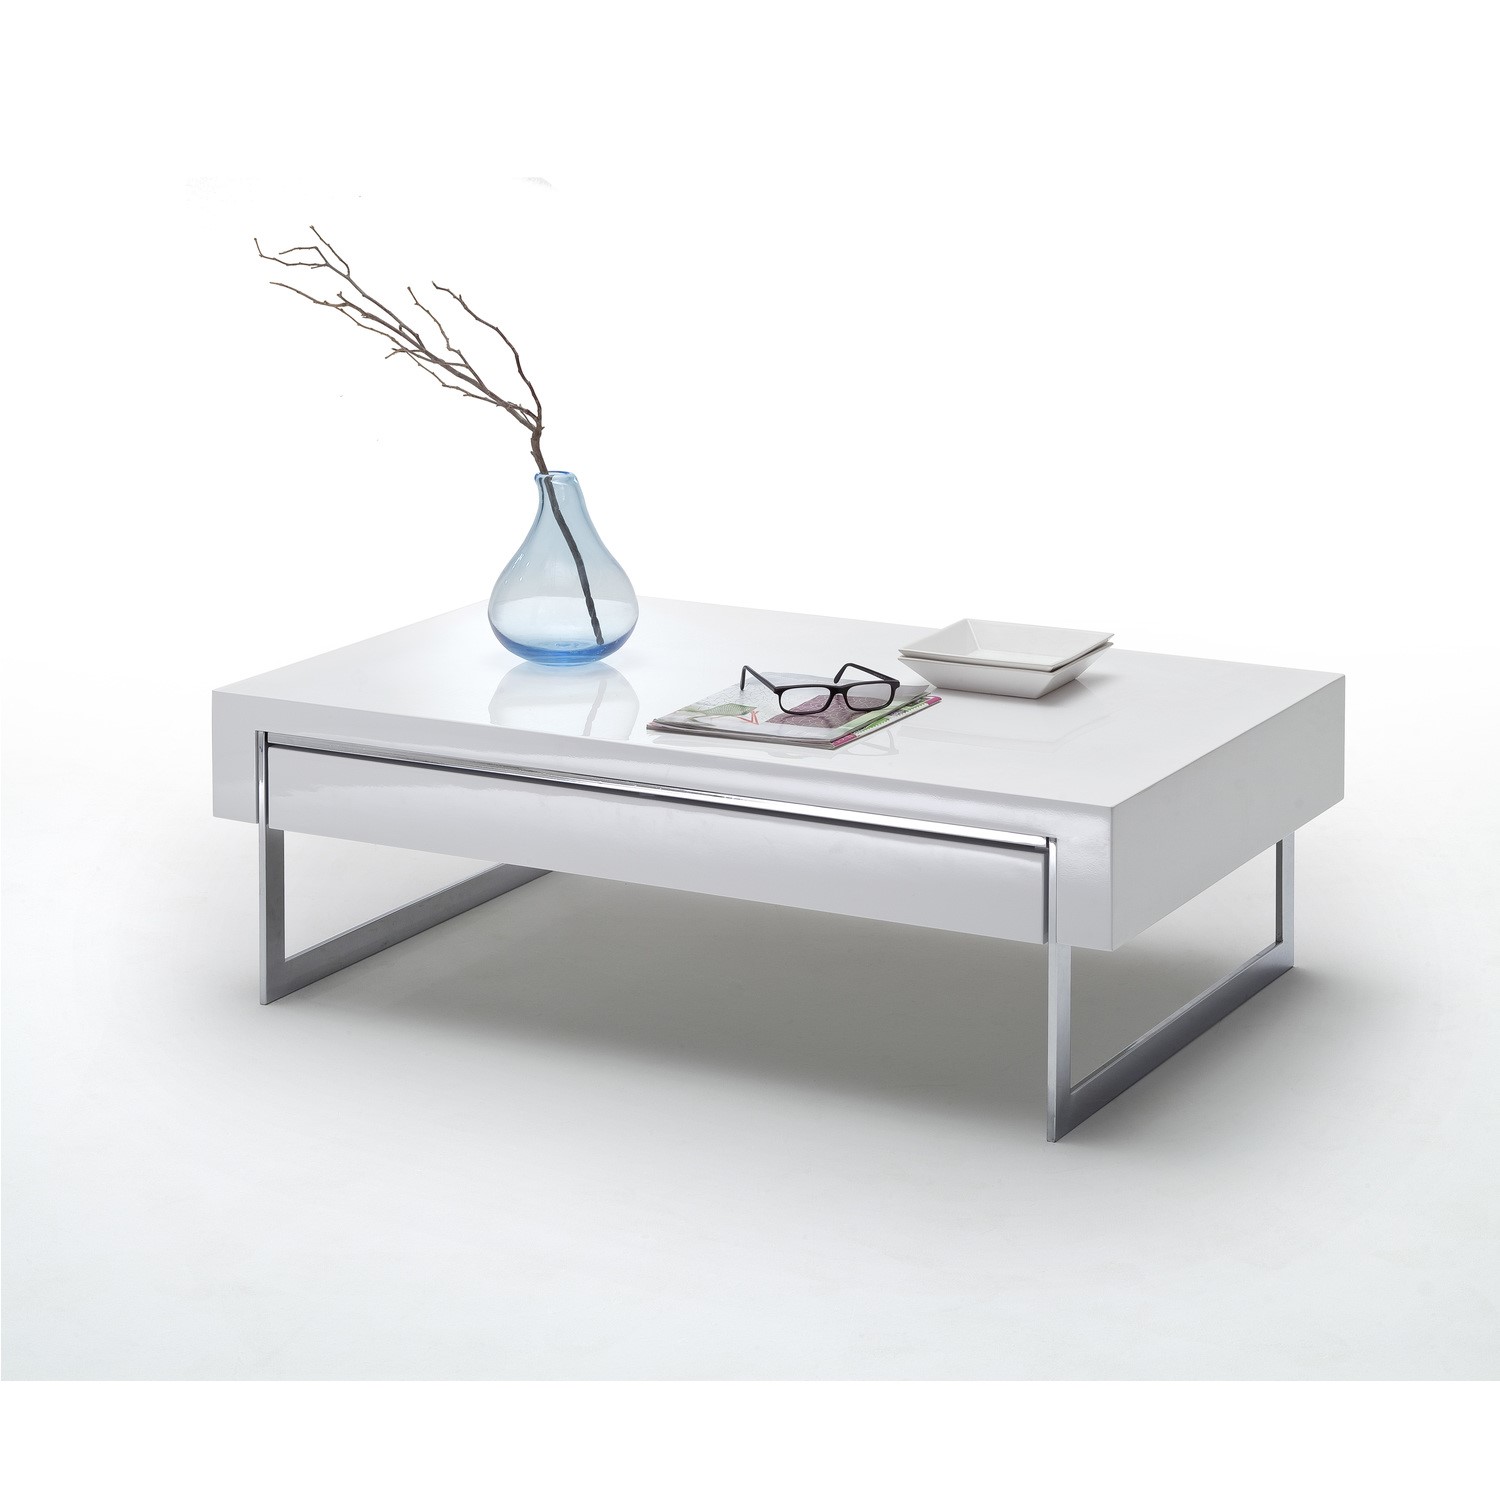 Evoque White High Gloss Coffee Table, White Gloss Side Table With Drawers